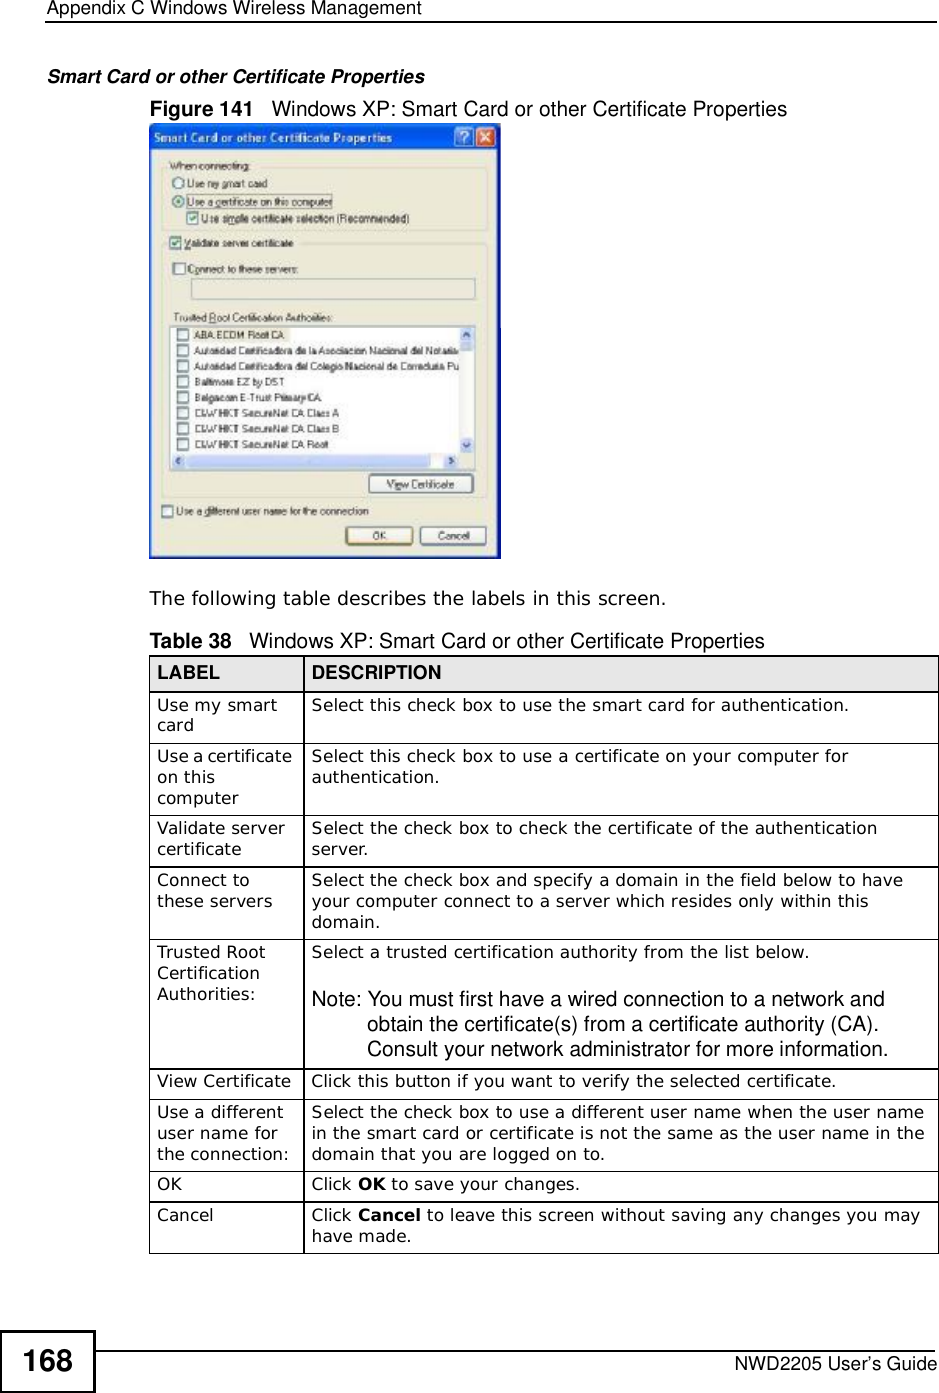 Appendix CWindows Wireless ManagementNWD2205 User’s Guide168Smart Card or other Certificate PropertiesFigure 141   Windows XP: Smart Card or other Certificate PropertiesThe following table describes the labels in this screen.Table 38   Windows XP: Smart Card or other Certificate PropertiesLABEL DESCRIPTIONUse my smart card Select this check box to use the smart card for authentication.Use a certificate on this computerSelect this check box to use a certificate on your computer for authentication.Validate server certificate Select the check box to check the certificate of the authentication server.Connect to these servers Select the check box and specify a domain in the field below to have your computer connect to a server which resides only within this domain.Trusted Root CertificationAuthorities:Select a trusted certification authority from the list below.Note: You must first have a wired connection to a network and obtain the certificate(s) from a certificate authority (CA). Consult your network administrator for more information.View CertificateClick this button if you want to verify the selected certificate.Use a different user name for the connection:Select the check box to use a different user name when the user name in the smart card or certificate is not the same as the user name in the domain that you are logged on to.OKClick OK to save your changes.CancelClick Cancel to leave this screen without saving any changes you may have made.